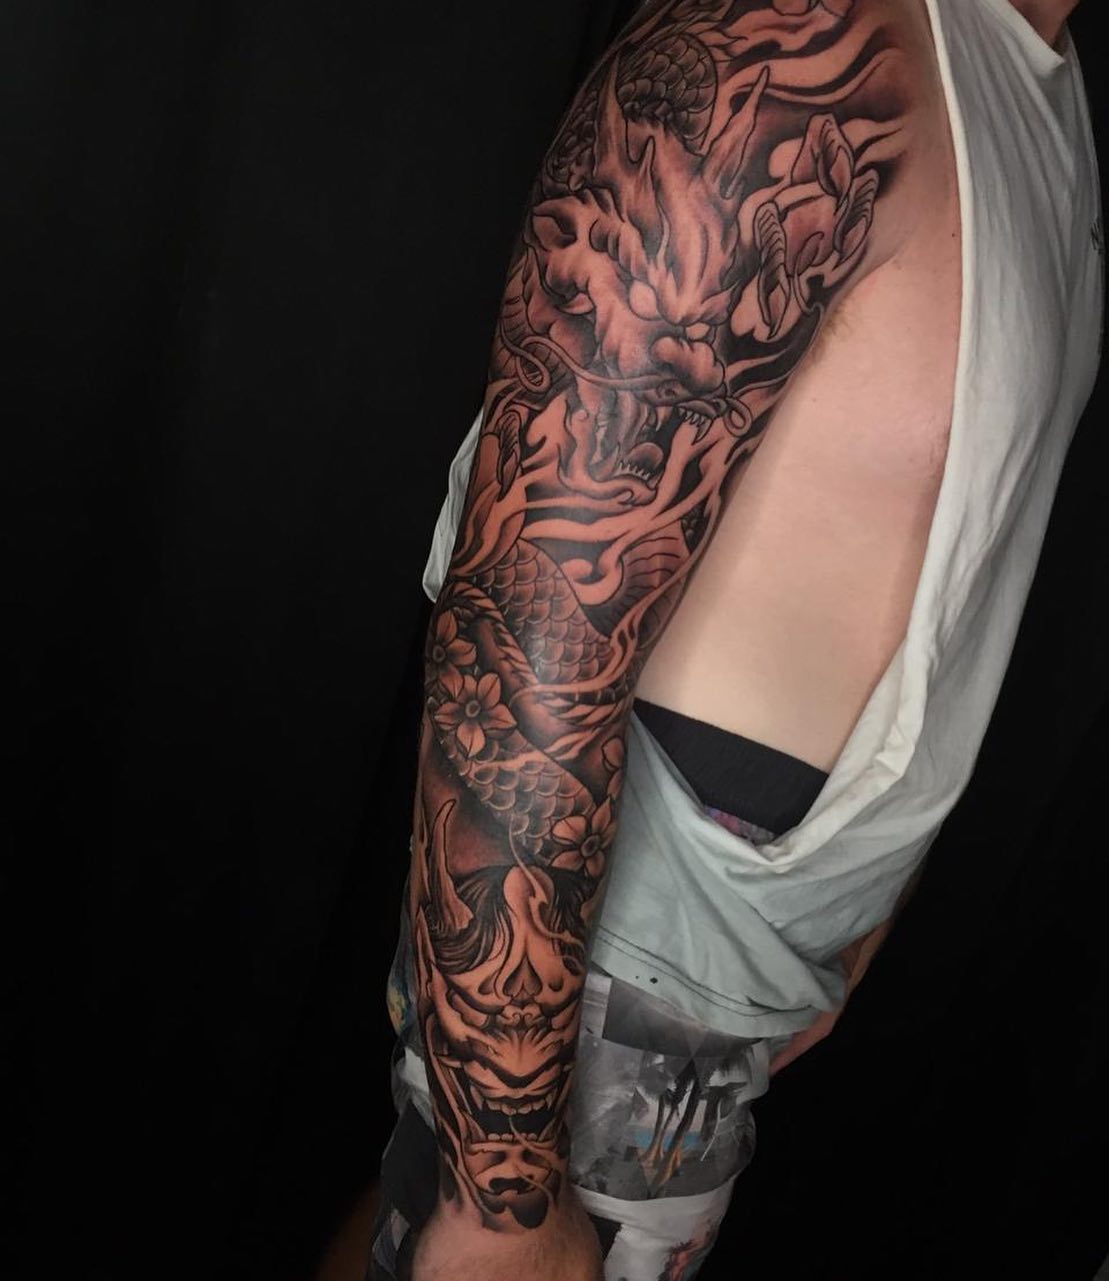 A giant tattoo such as this one will look the best on guys who work out, as well as men who fancy big-sleeve concepts.